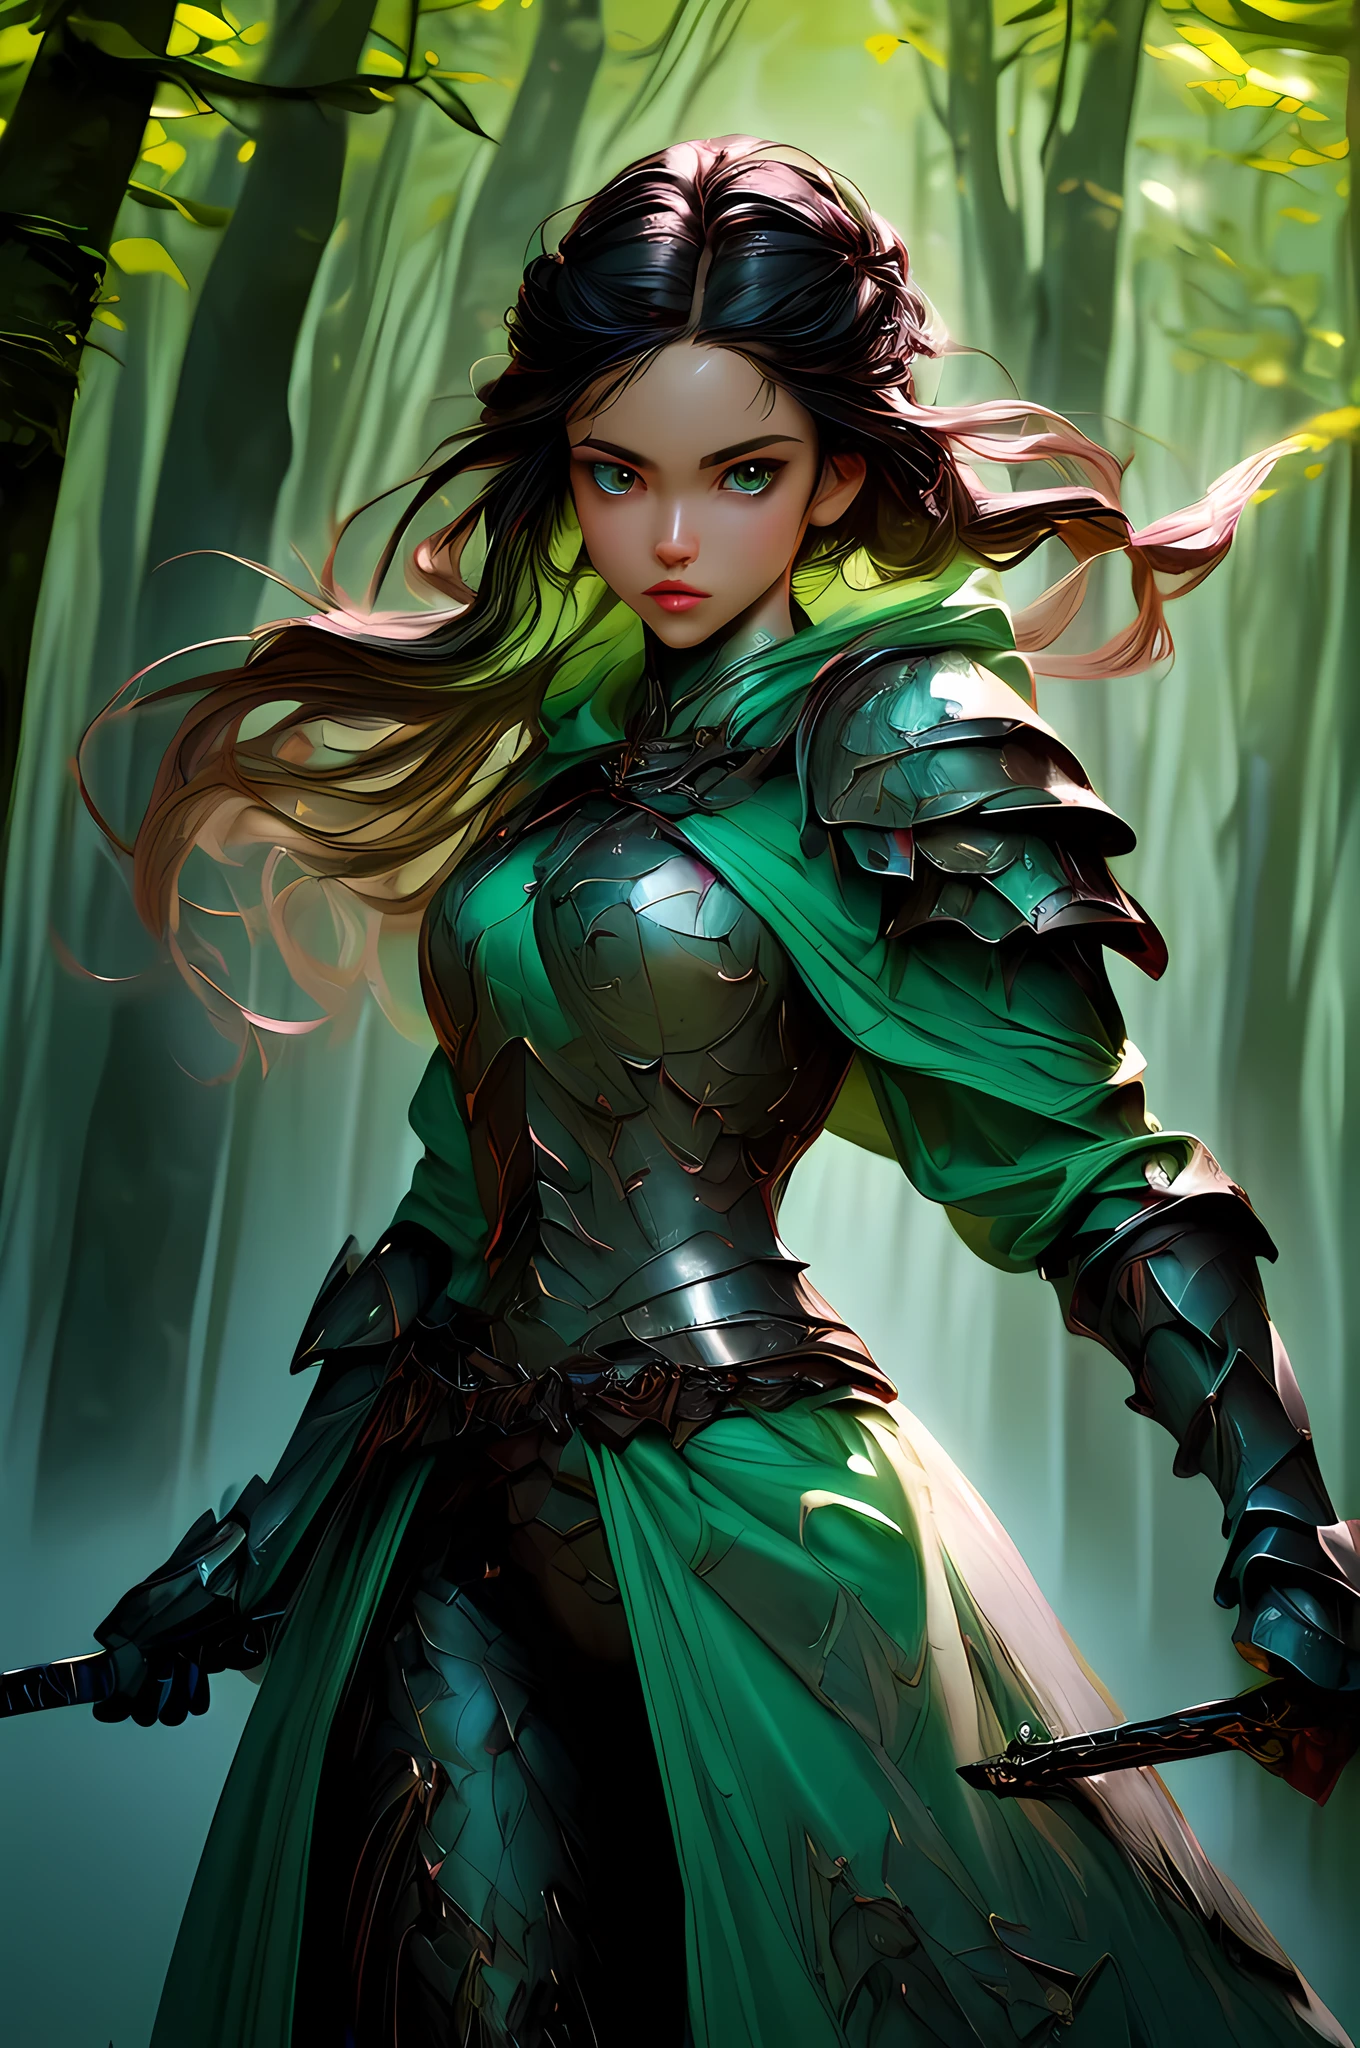 a picture of woman paladin of nature protecting the forest, a woman knight, black hair, long hair, full body (best details, Masterpiece, best quality :1.5), ultra detailed face (best details, Masterpiece, best quality :1.5), ultra feminine (best details, Masterpiece, best quality :1.5), (black hair: 1.2), long hair, braided hair, pale skin, (deep blue: 1.2) eyes, intense eyes, wearying heavy armor, (white armor: 1.2)  (best details, Masterpiece, best quality :1.5), (green cloak: 1.2) , armed with a sword, glowing sword GlowingRunes_yellow, fantasy forest background, D&D art, RPG art, magical atmosphere magic-fantasy-forest, ultra best realistic, best details, best quality, 16k, [ultra detailed], masterpiece, best quality, (extremely detailed), ultra wide shot, photorealism, depth of field, hyper realistic painting